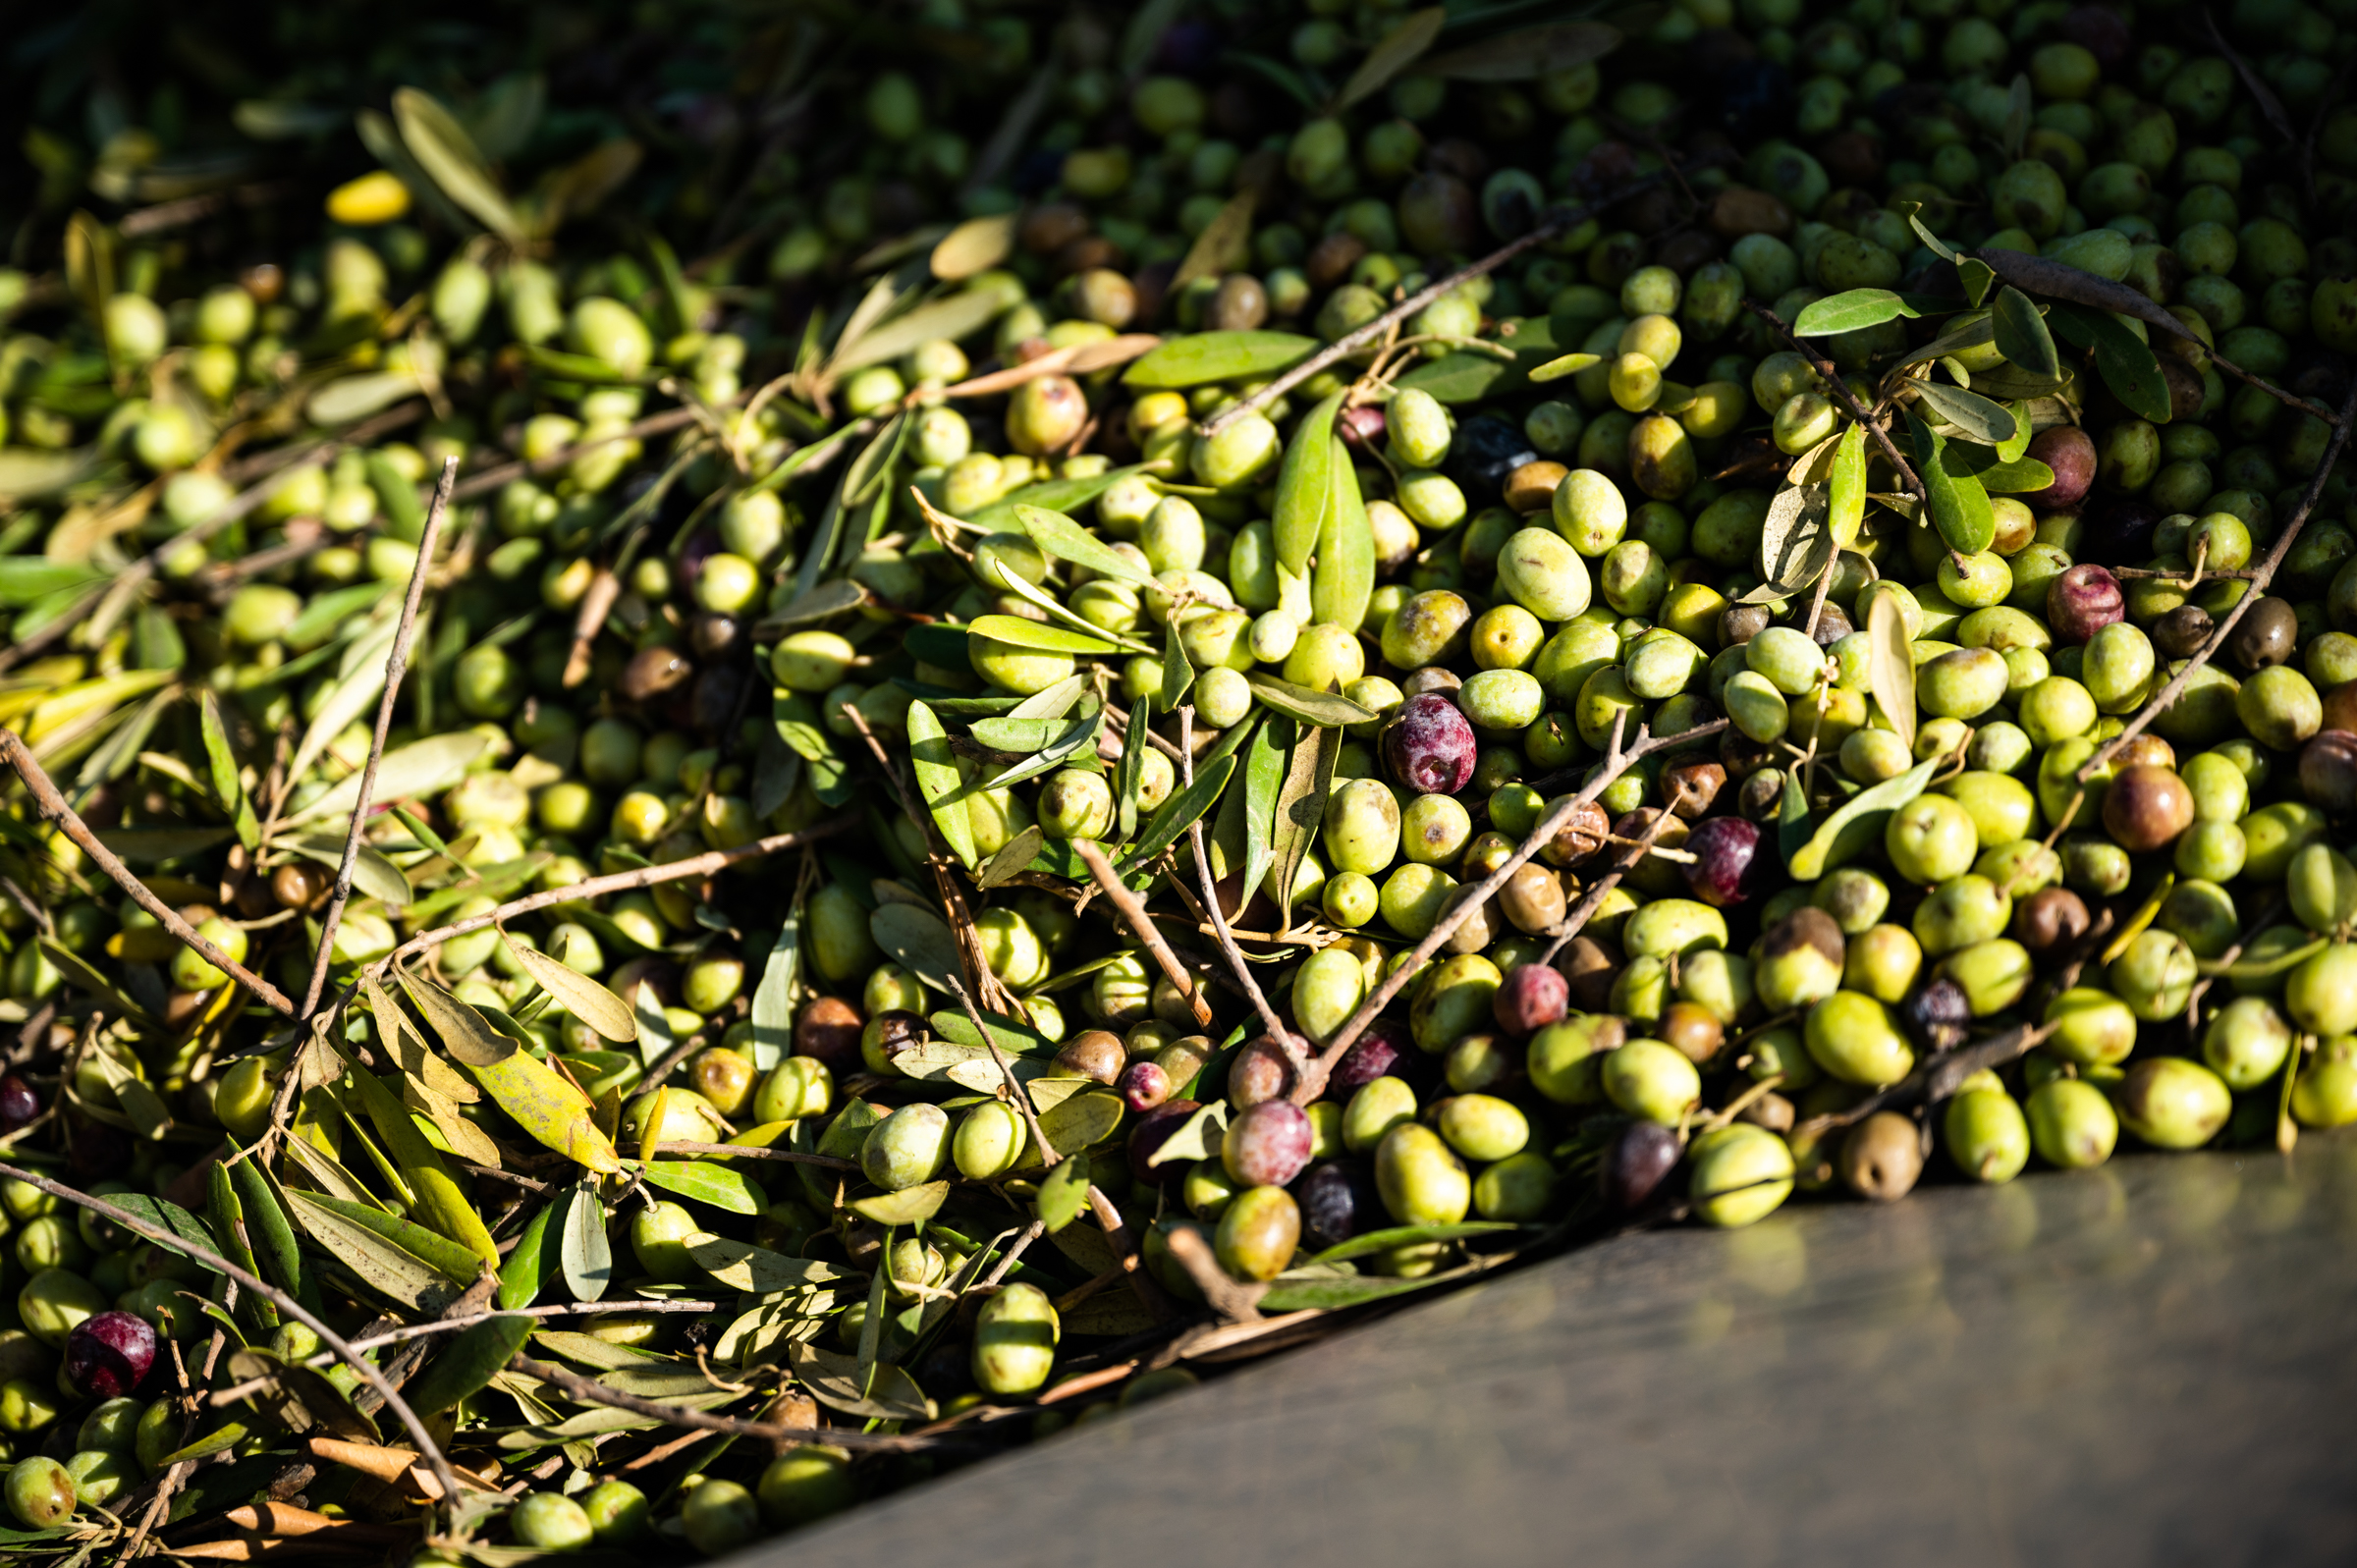 Freshly harvested olives are dumped so that leaves and sticks can be sifted out